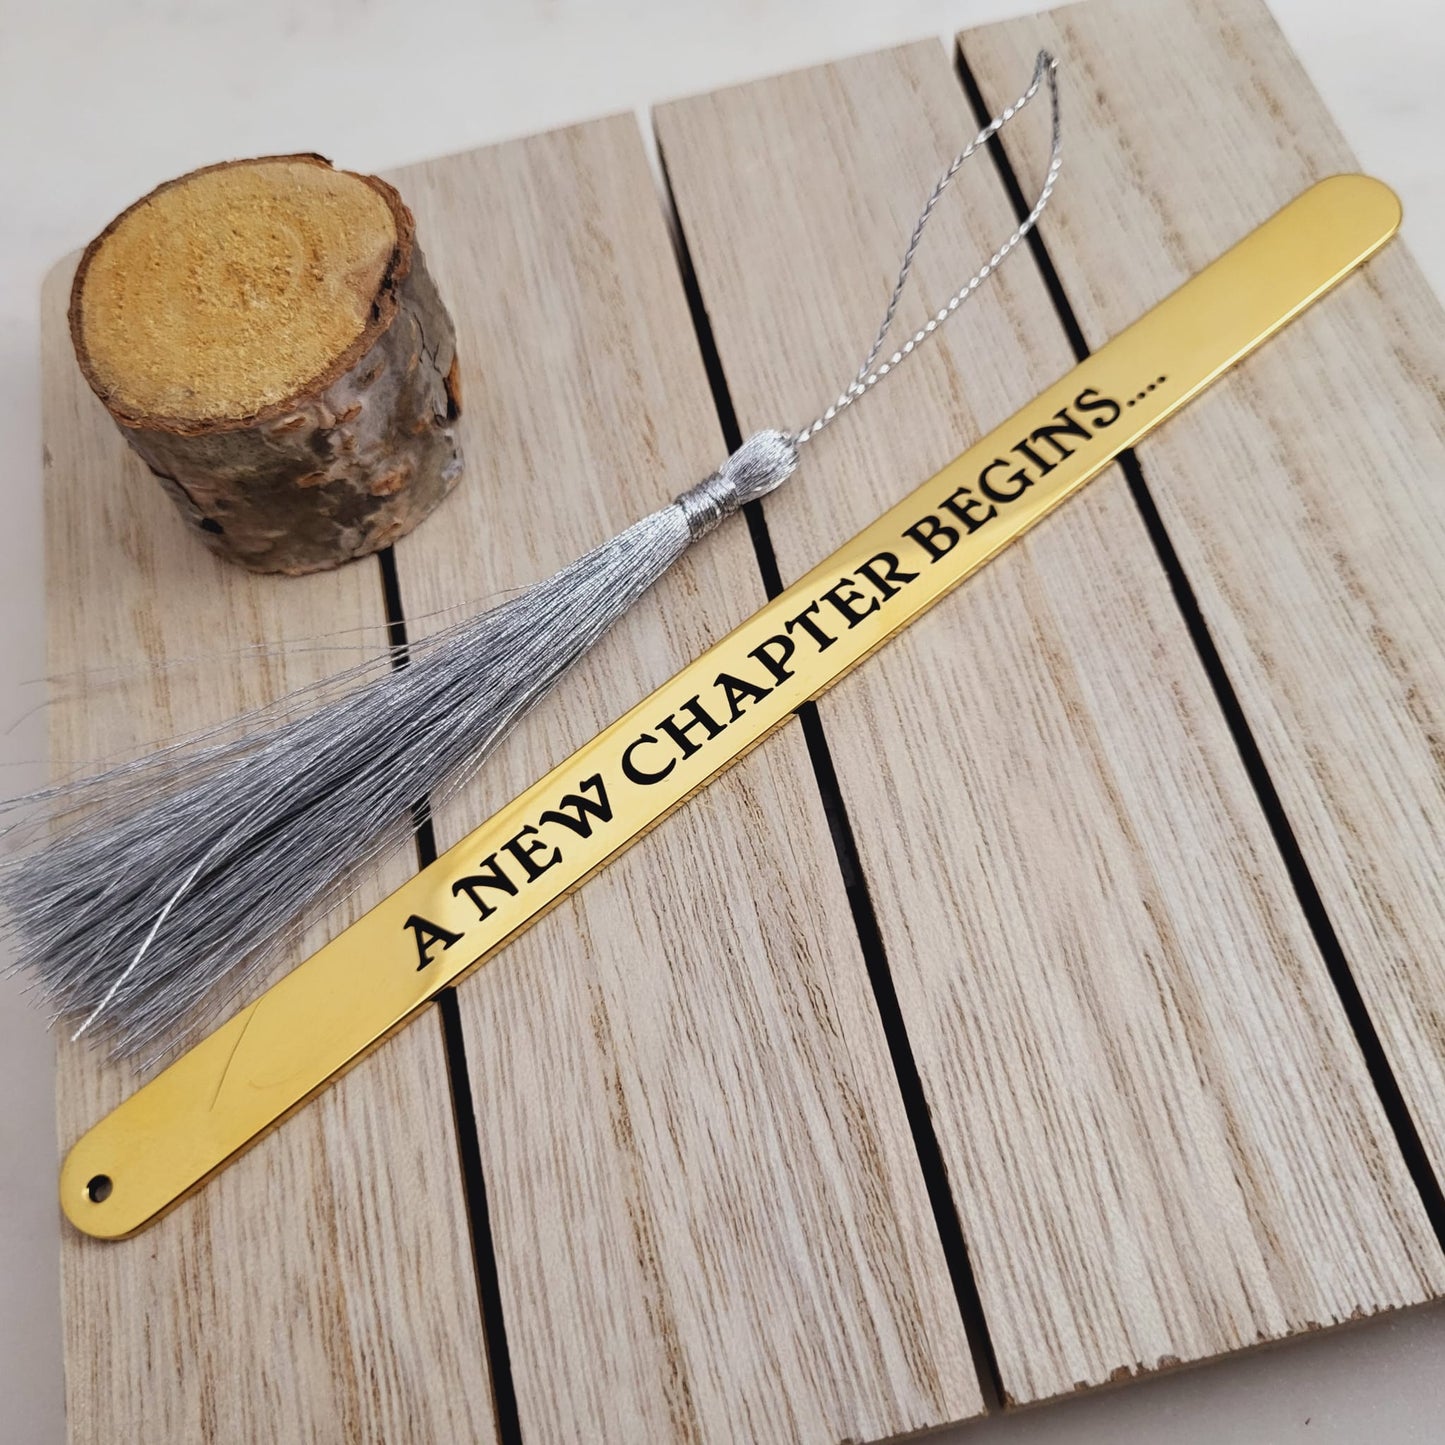 Retirement Gift Bookmarks - A New Chapter Begins